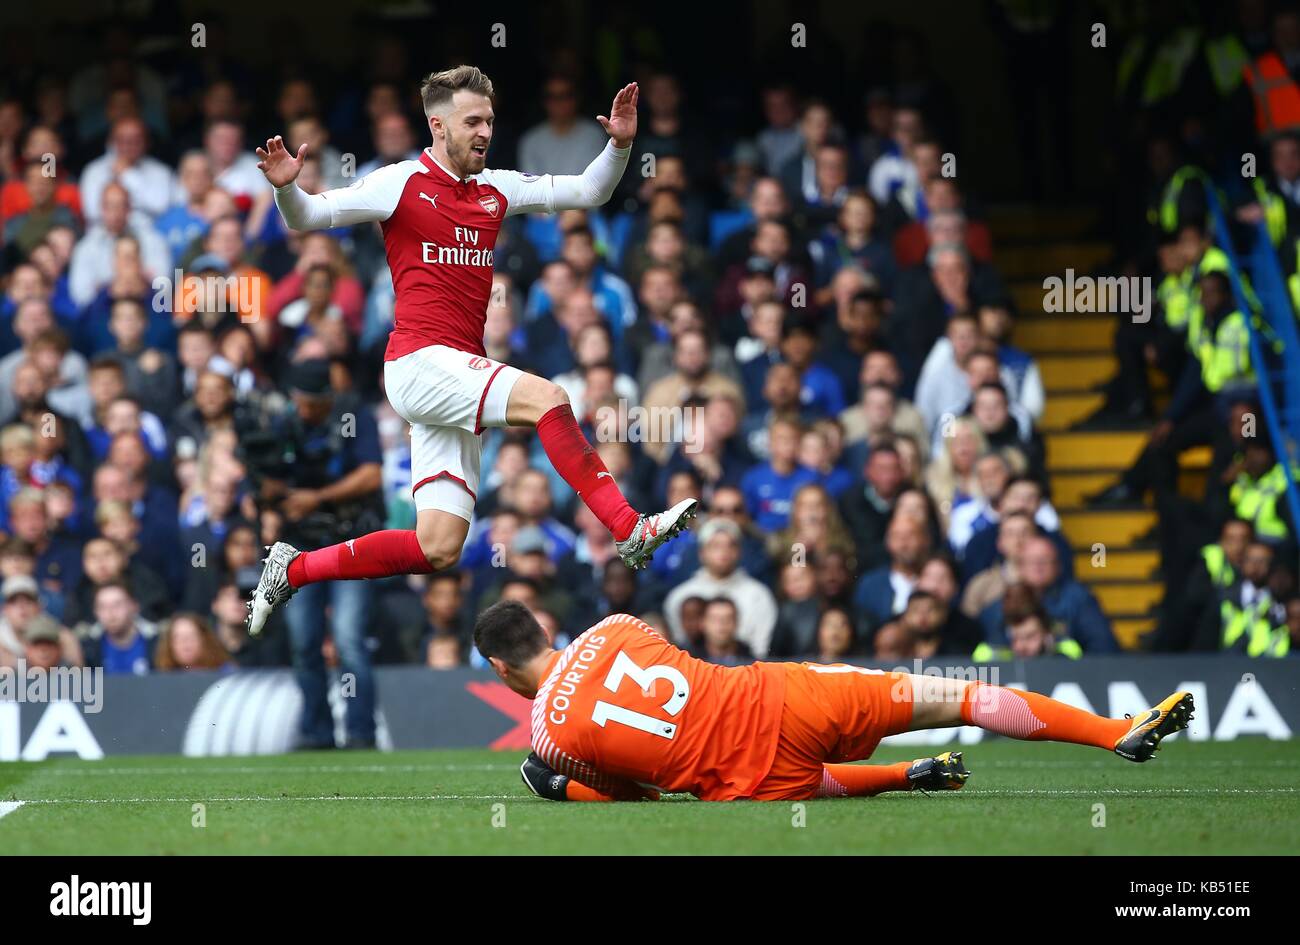 Aaron Ramsey of Arsenal and Thibaut Courtois of Chelsea during the Premier League match between Chelsea and Arsenal at Stamford Bridge in London. 17 Sep 2017 Stock Photo